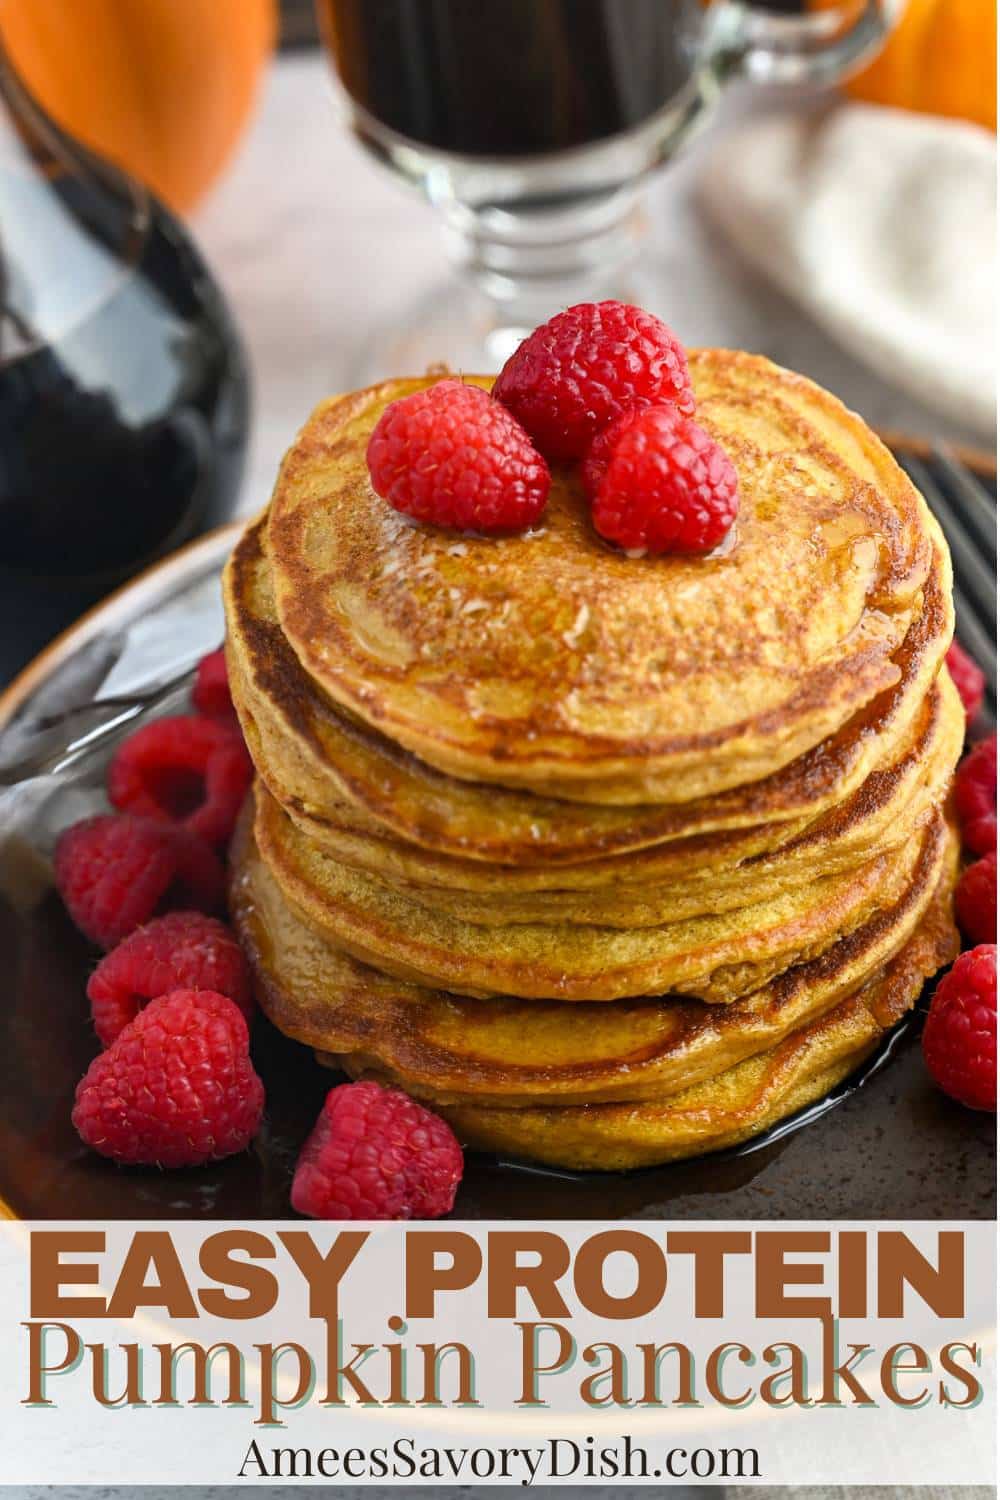 This quick and delicious recipe yields fluffy, flavorful pumpkin pancakes with a generous 26 grams of protein per serving. via @Ameessavorydish